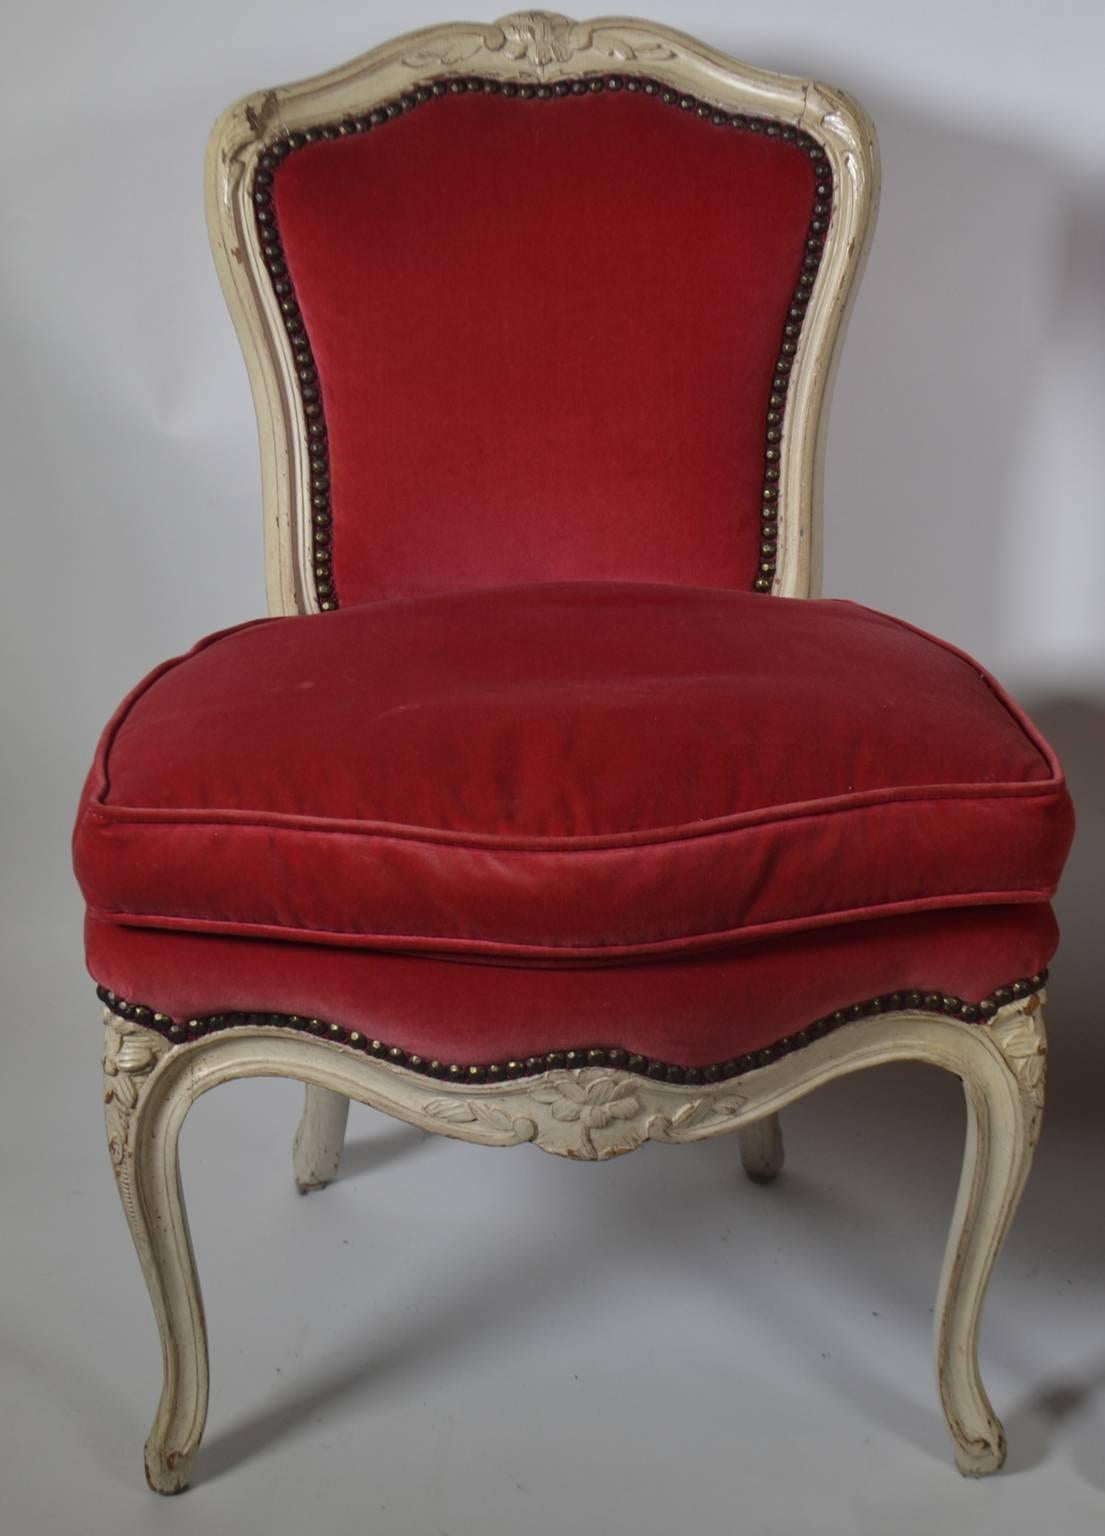 A pair of Louis XV-style carved and creme peinte upholstered chairs, shaped floral crest rail, padded back serpentine seat rail, cabriole legs. Measures: 18